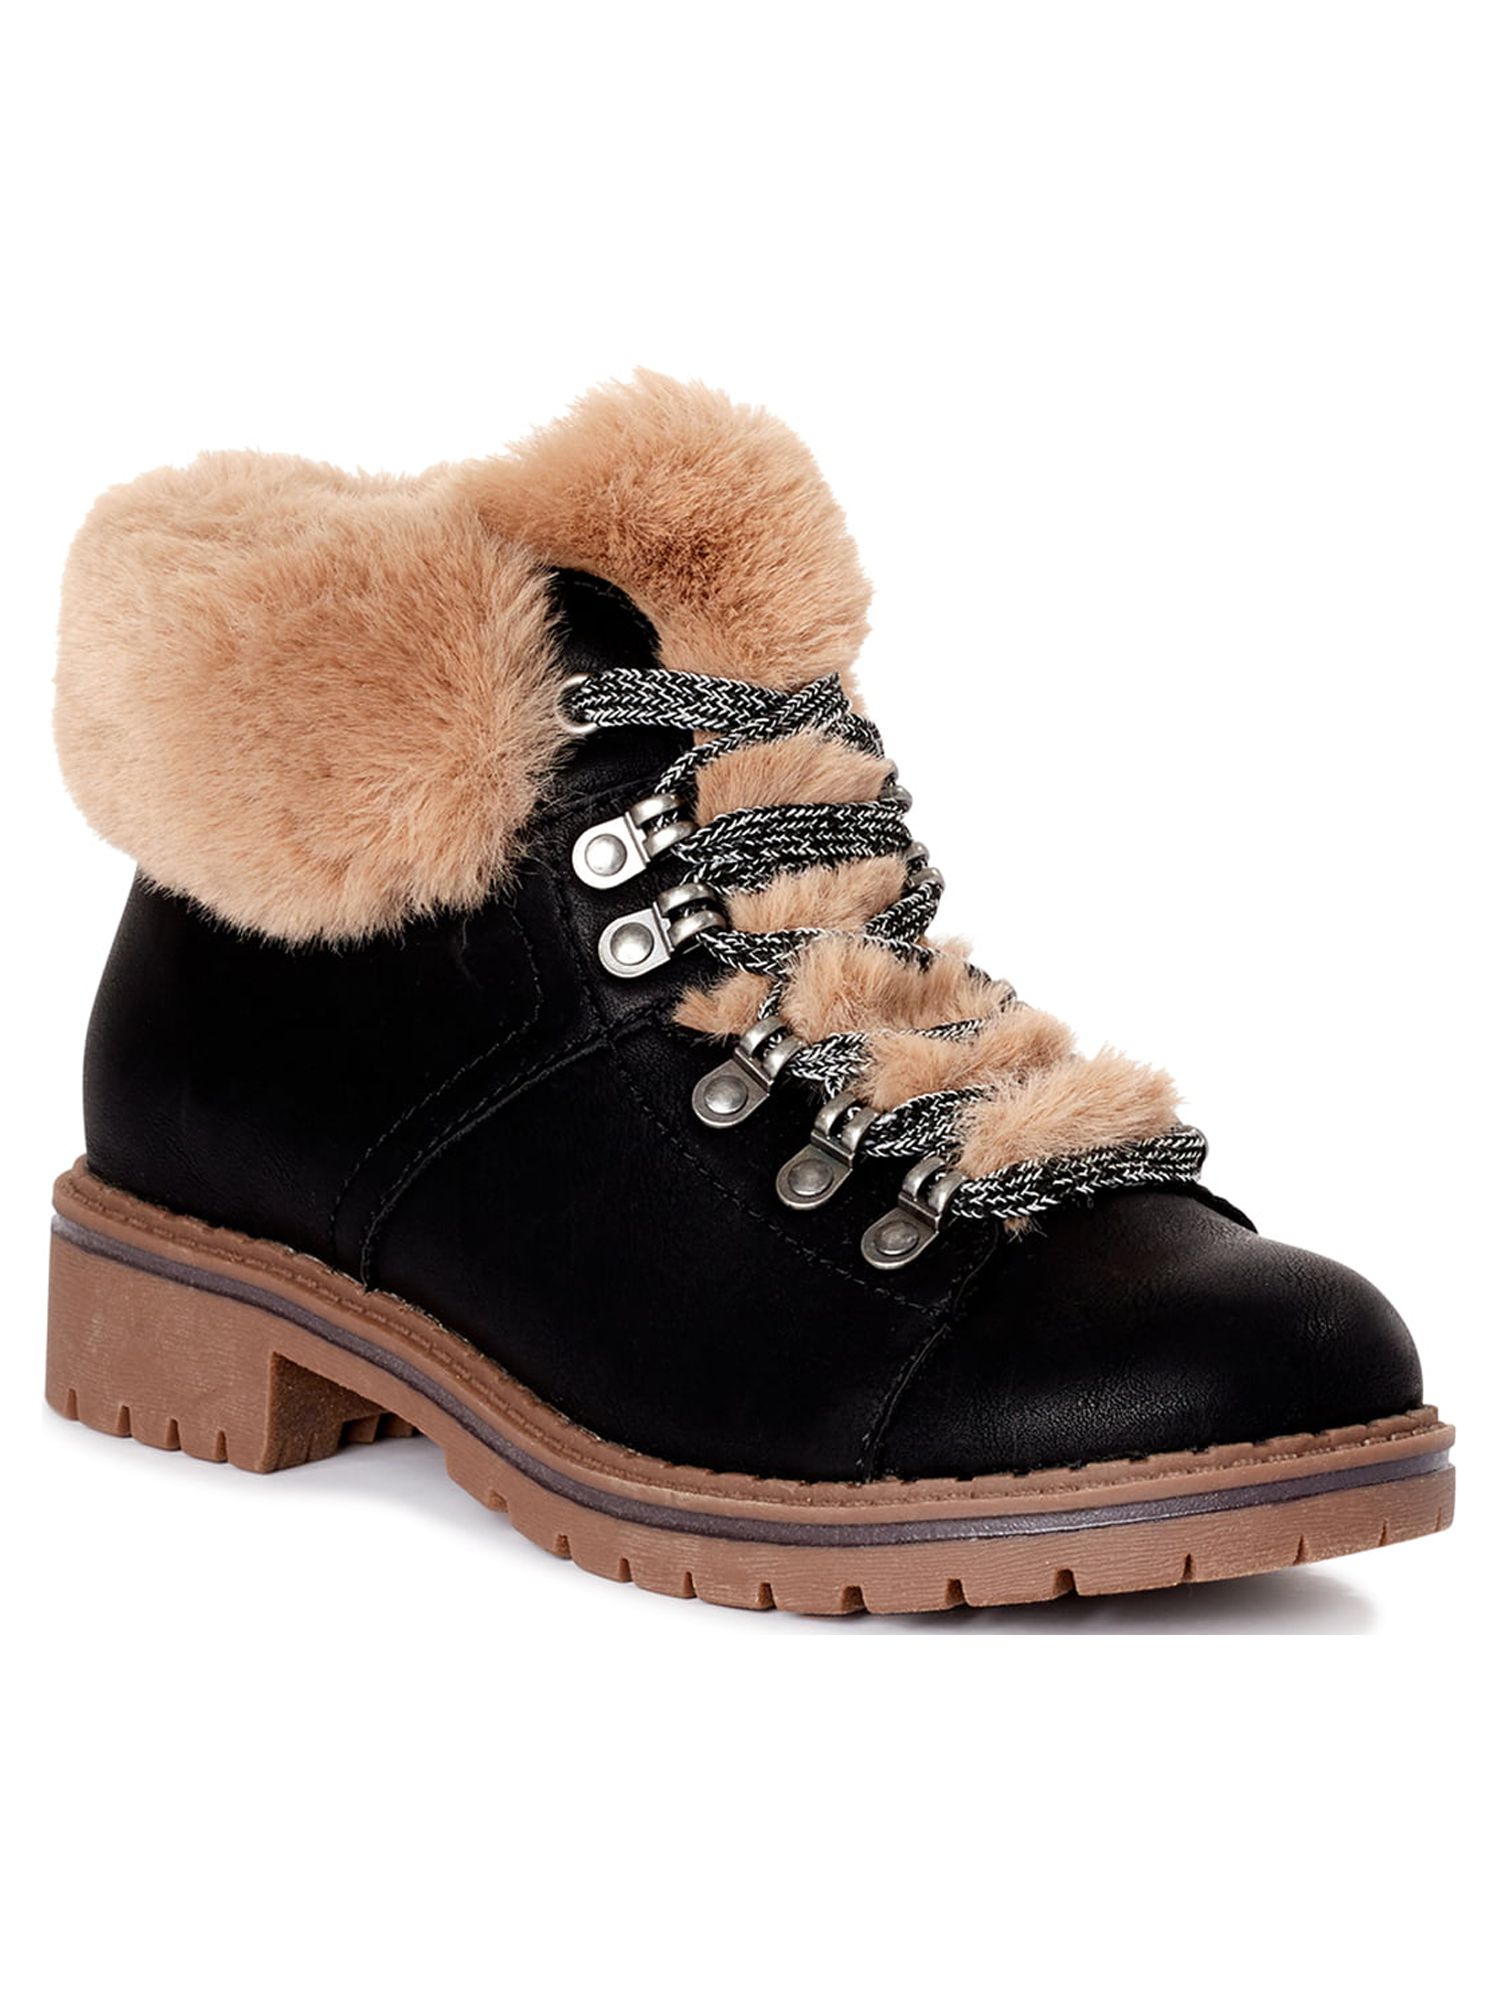 Time and Tru Women’s Faux Fur Hiker Boots - image 1 of 6